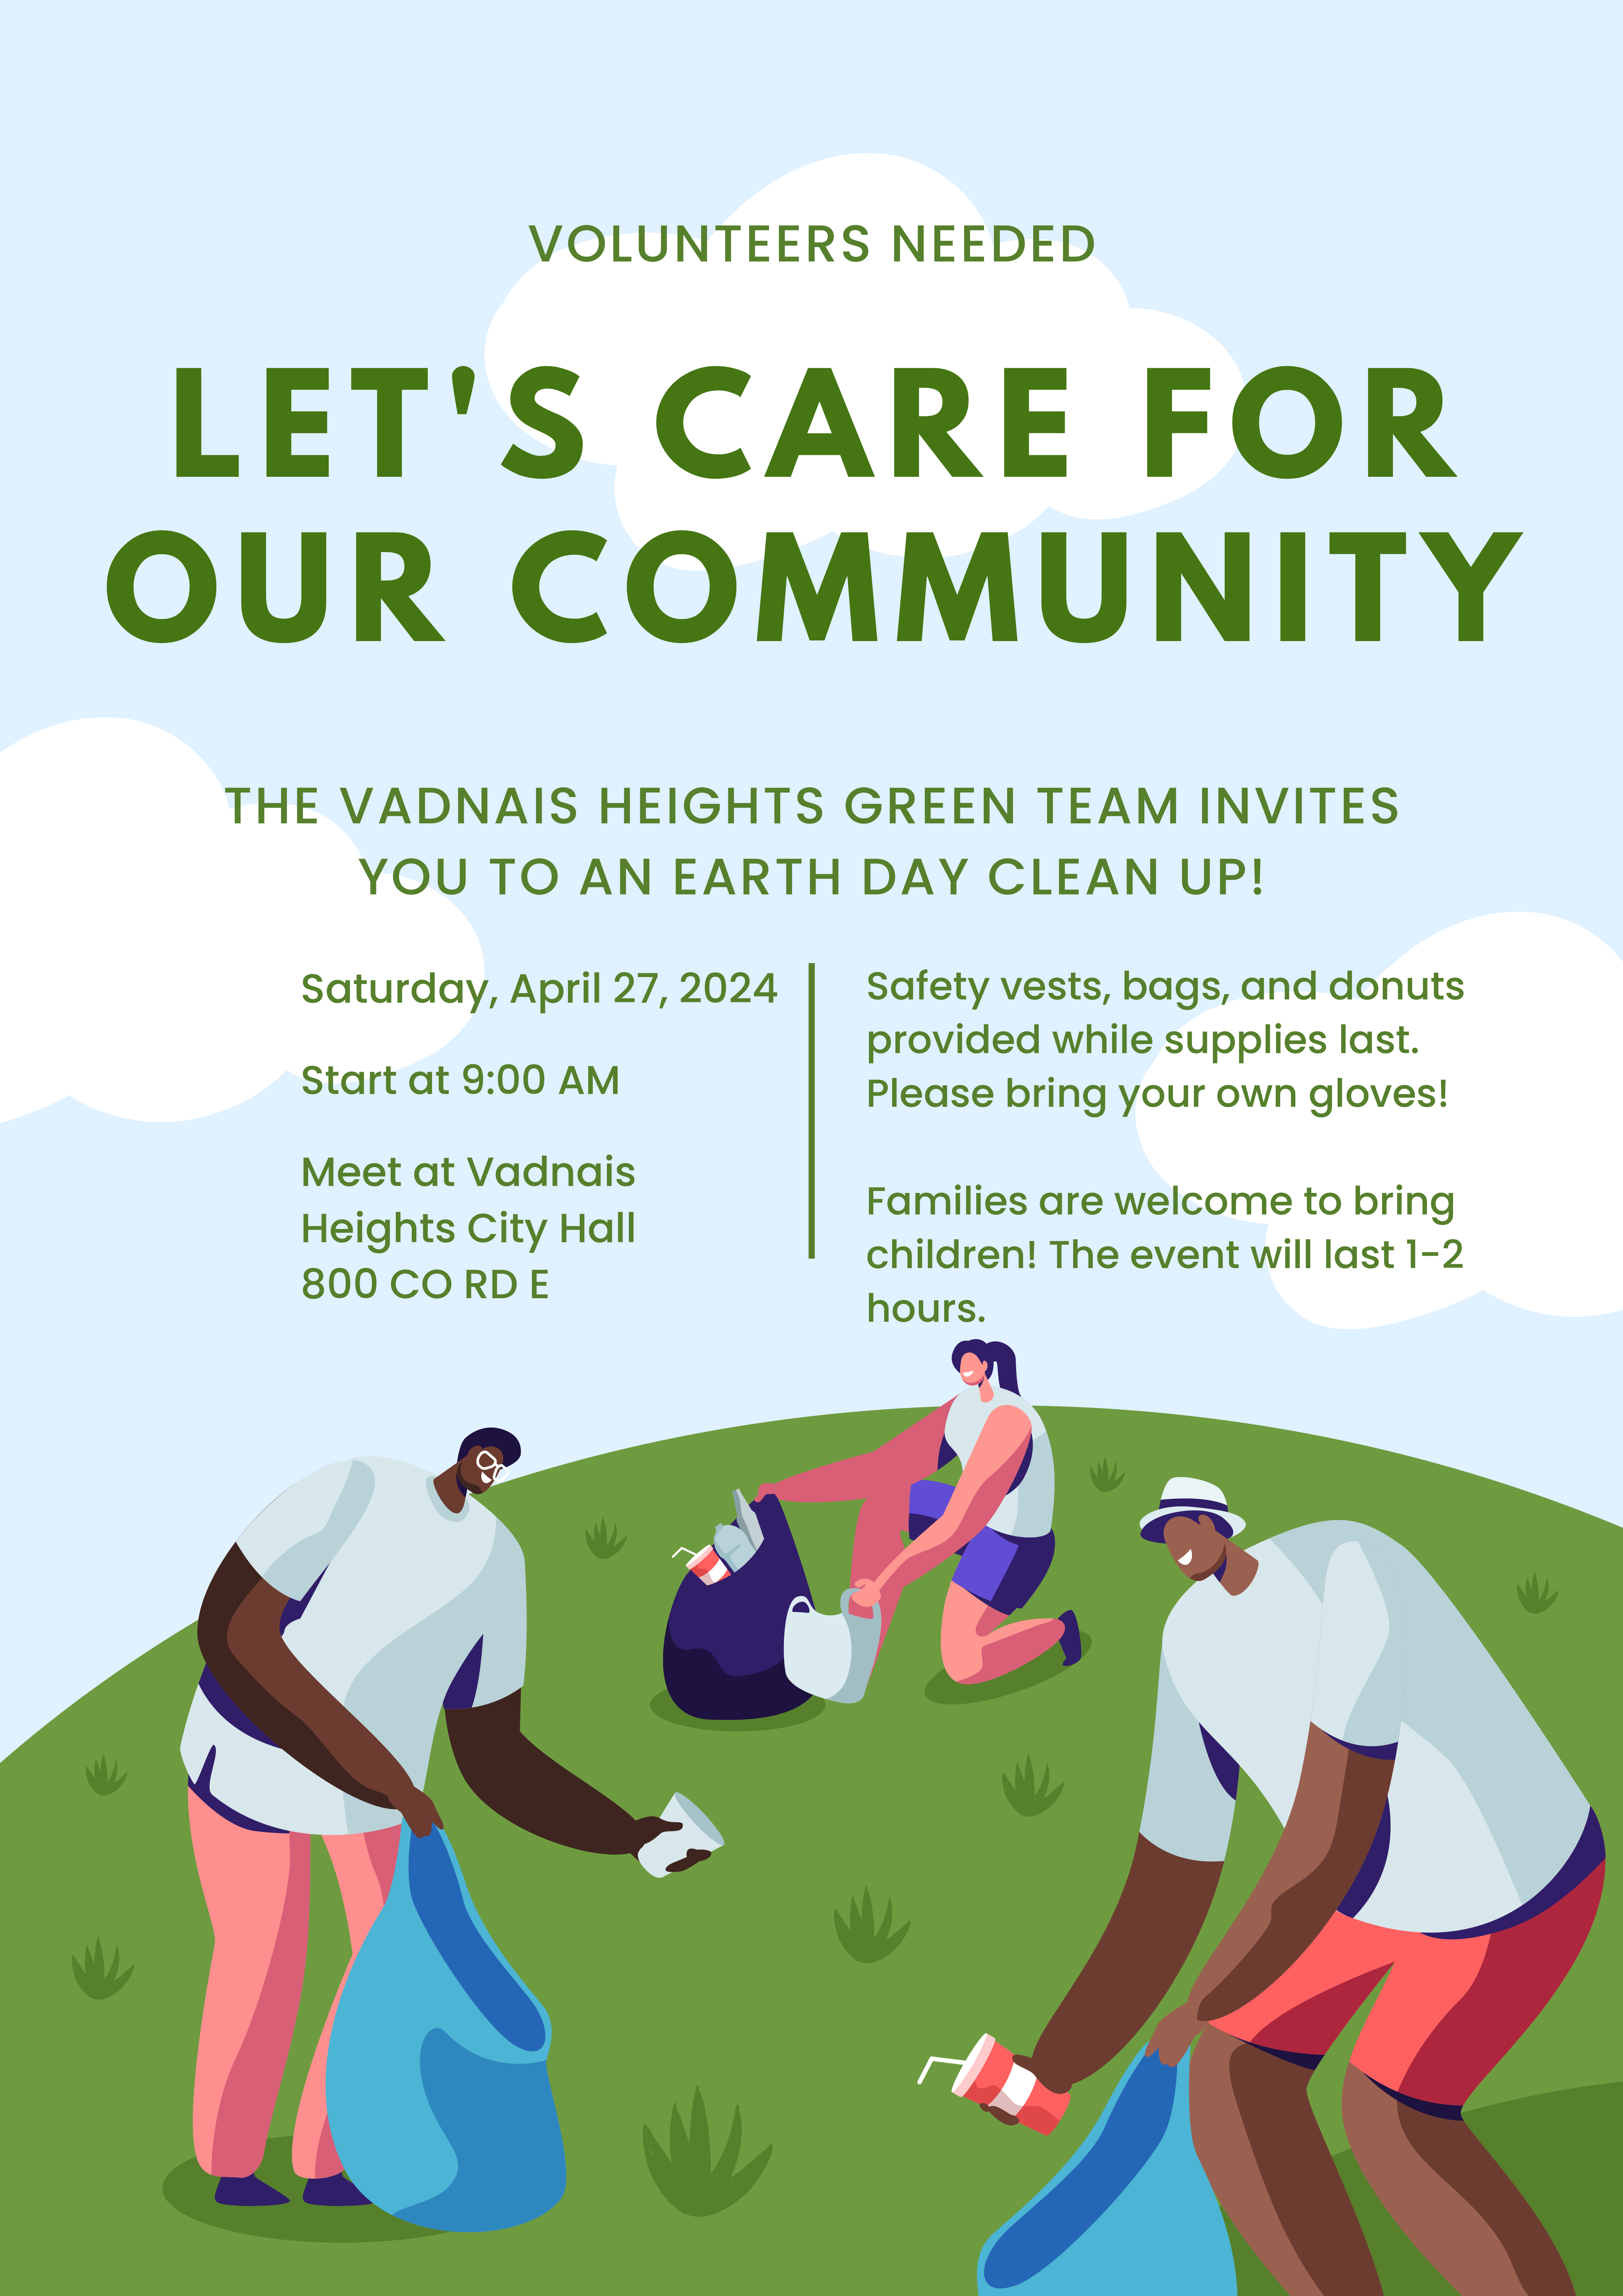 Join the Green Team for an Earth Day Clean Up